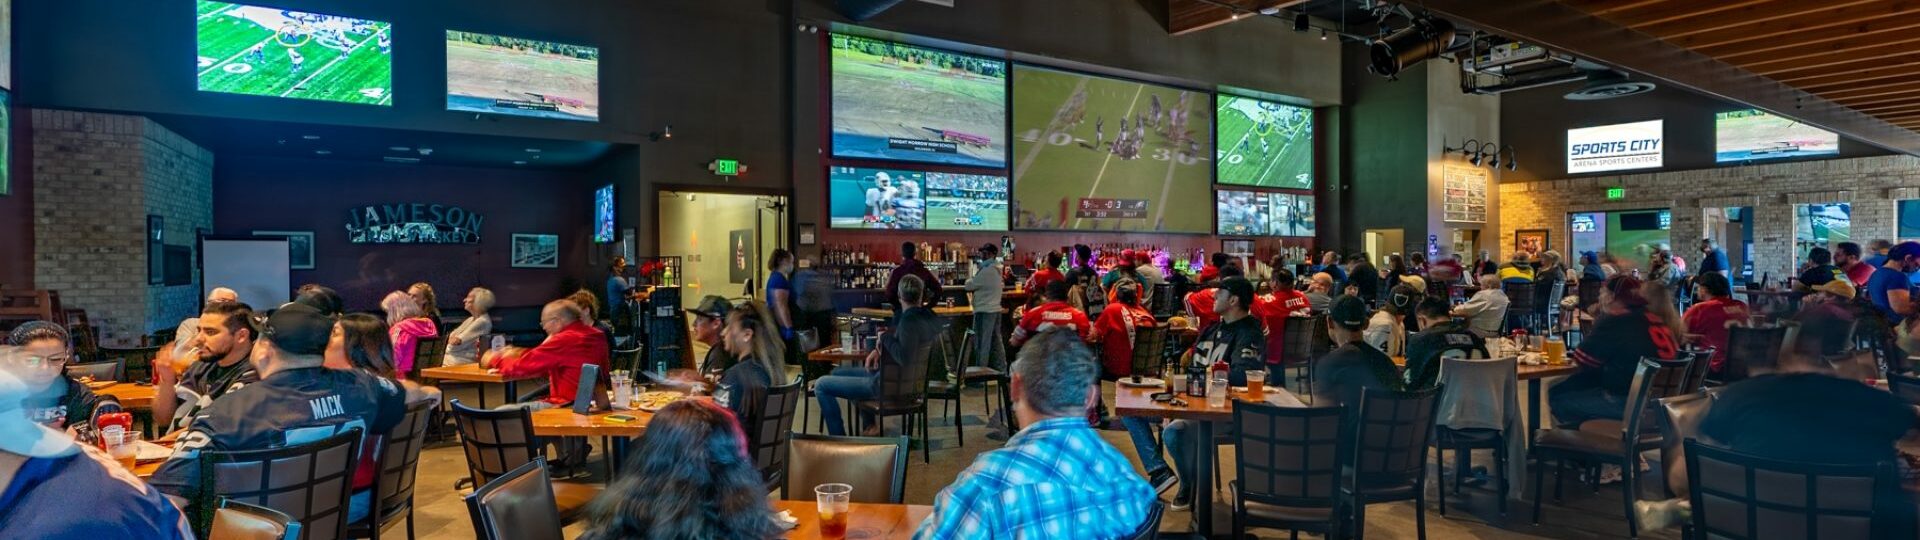 restaurant and pub with people eating, drinking, and watching sports from several television screens